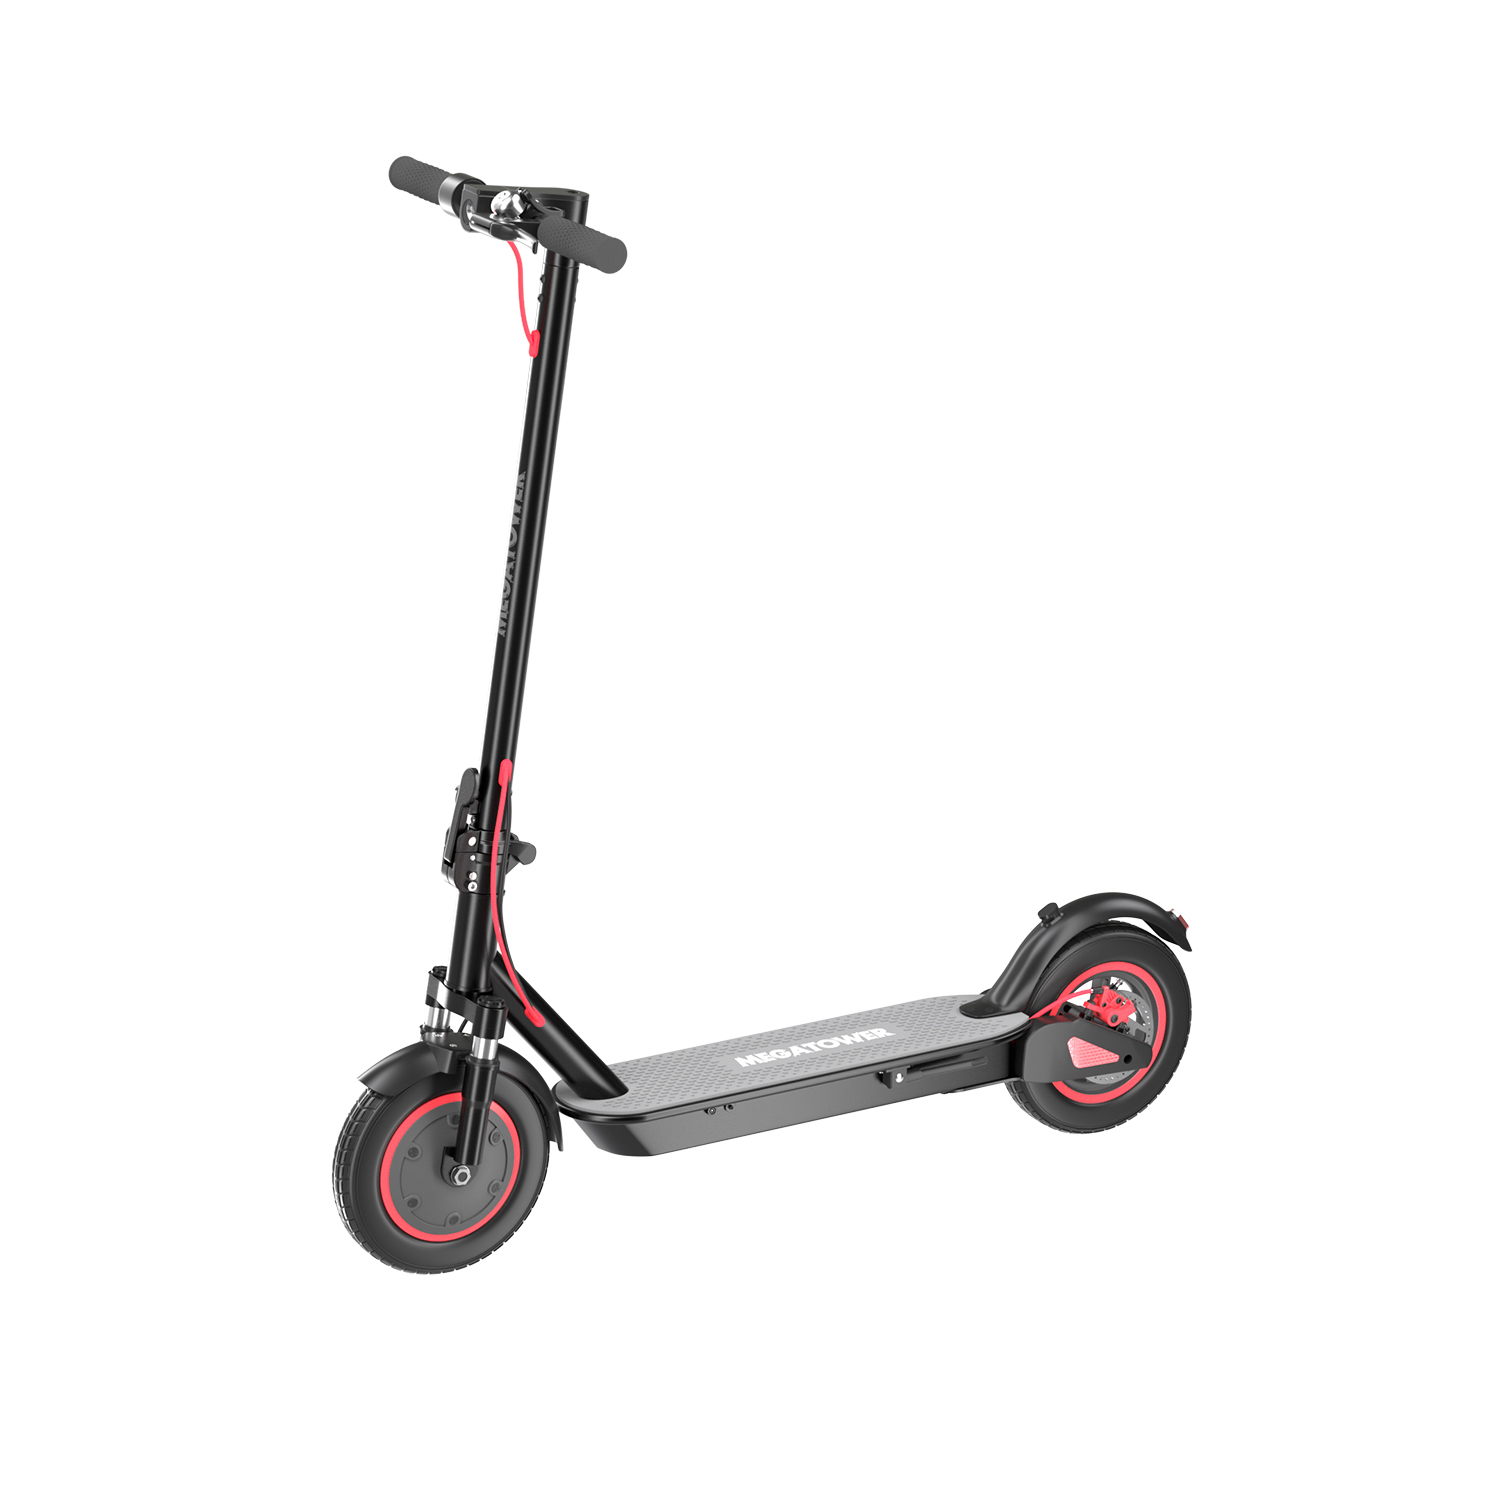 Trotinette électrique iScooter i9Max 500w + sac offert –